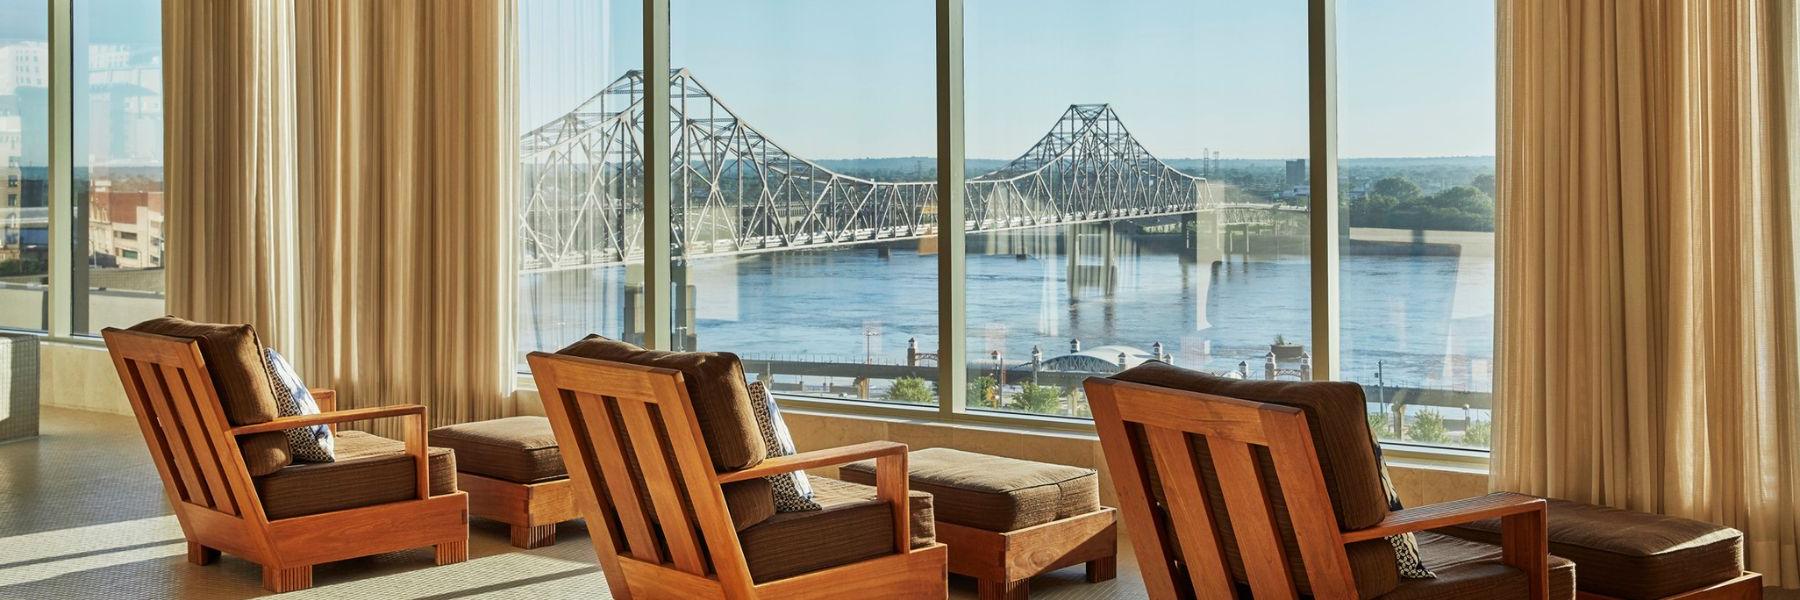 The spa at the Four Seasons Hotel St. Louis overlooks the Mississippi River.